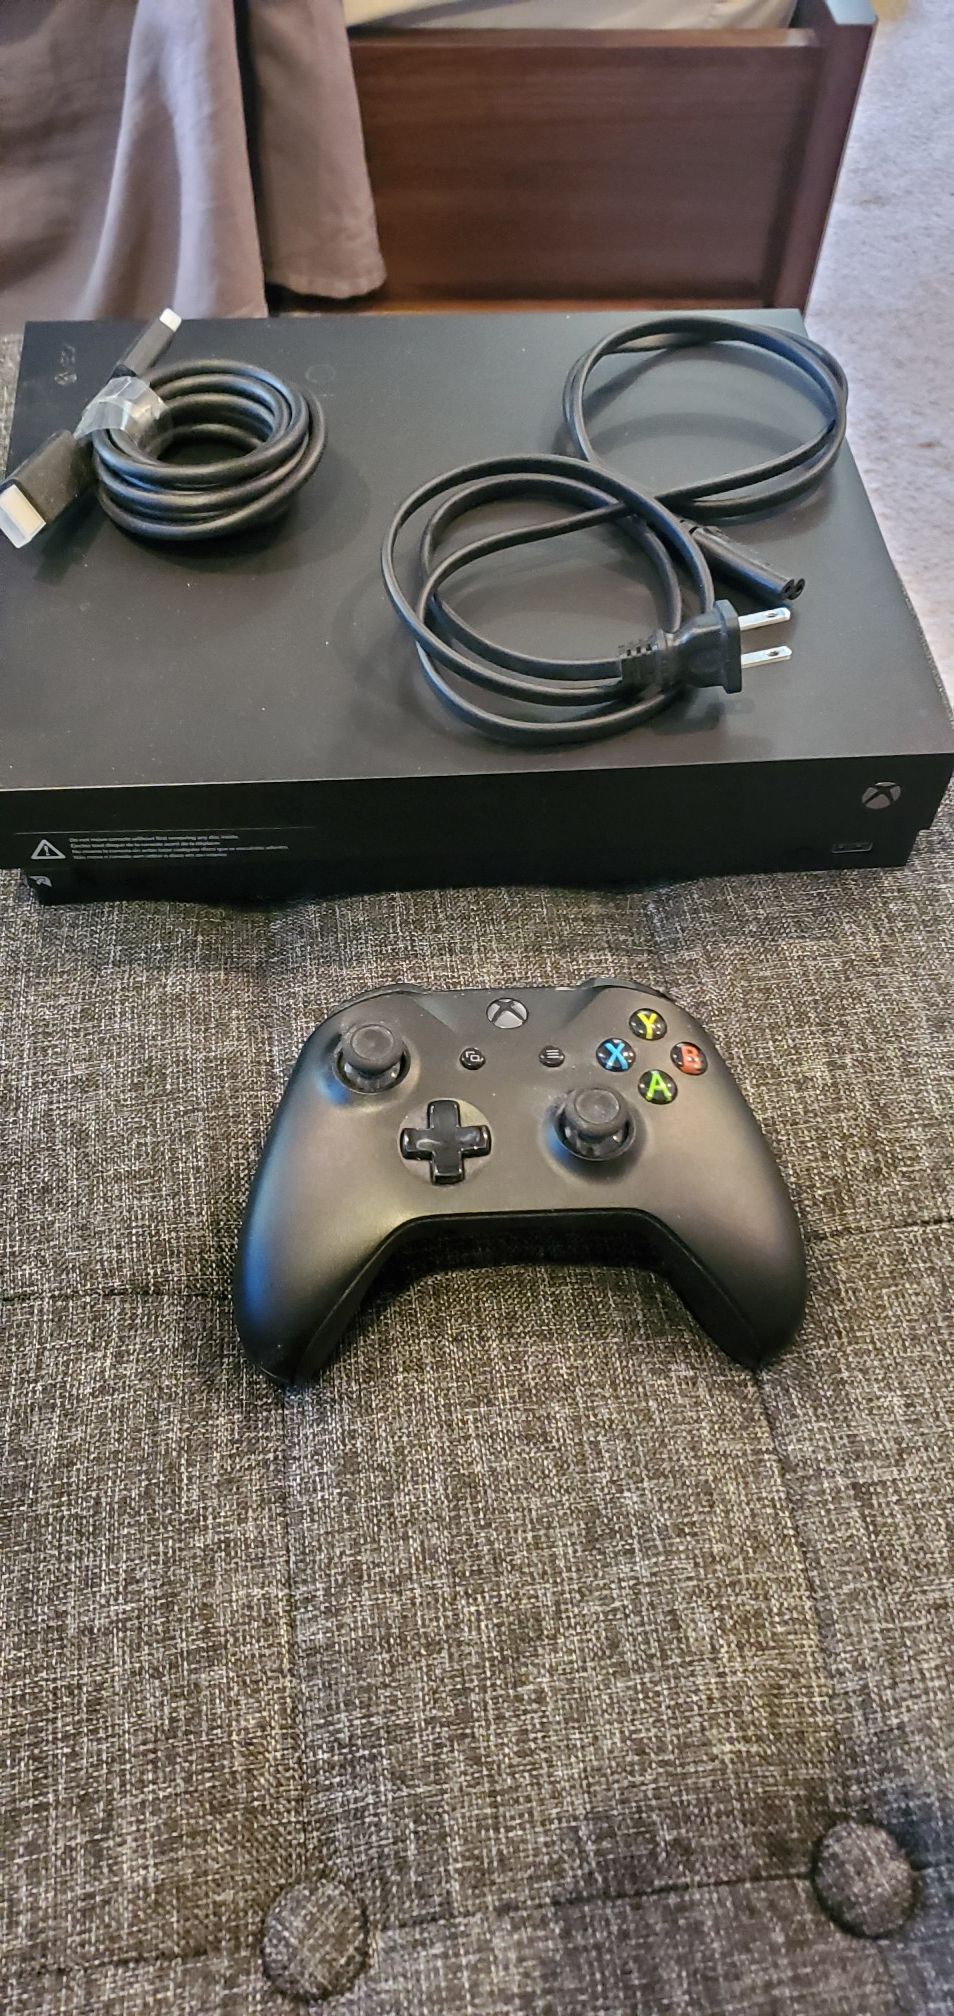 Xbox One X 1TB console with controller, HDMI cable and Carrying Case